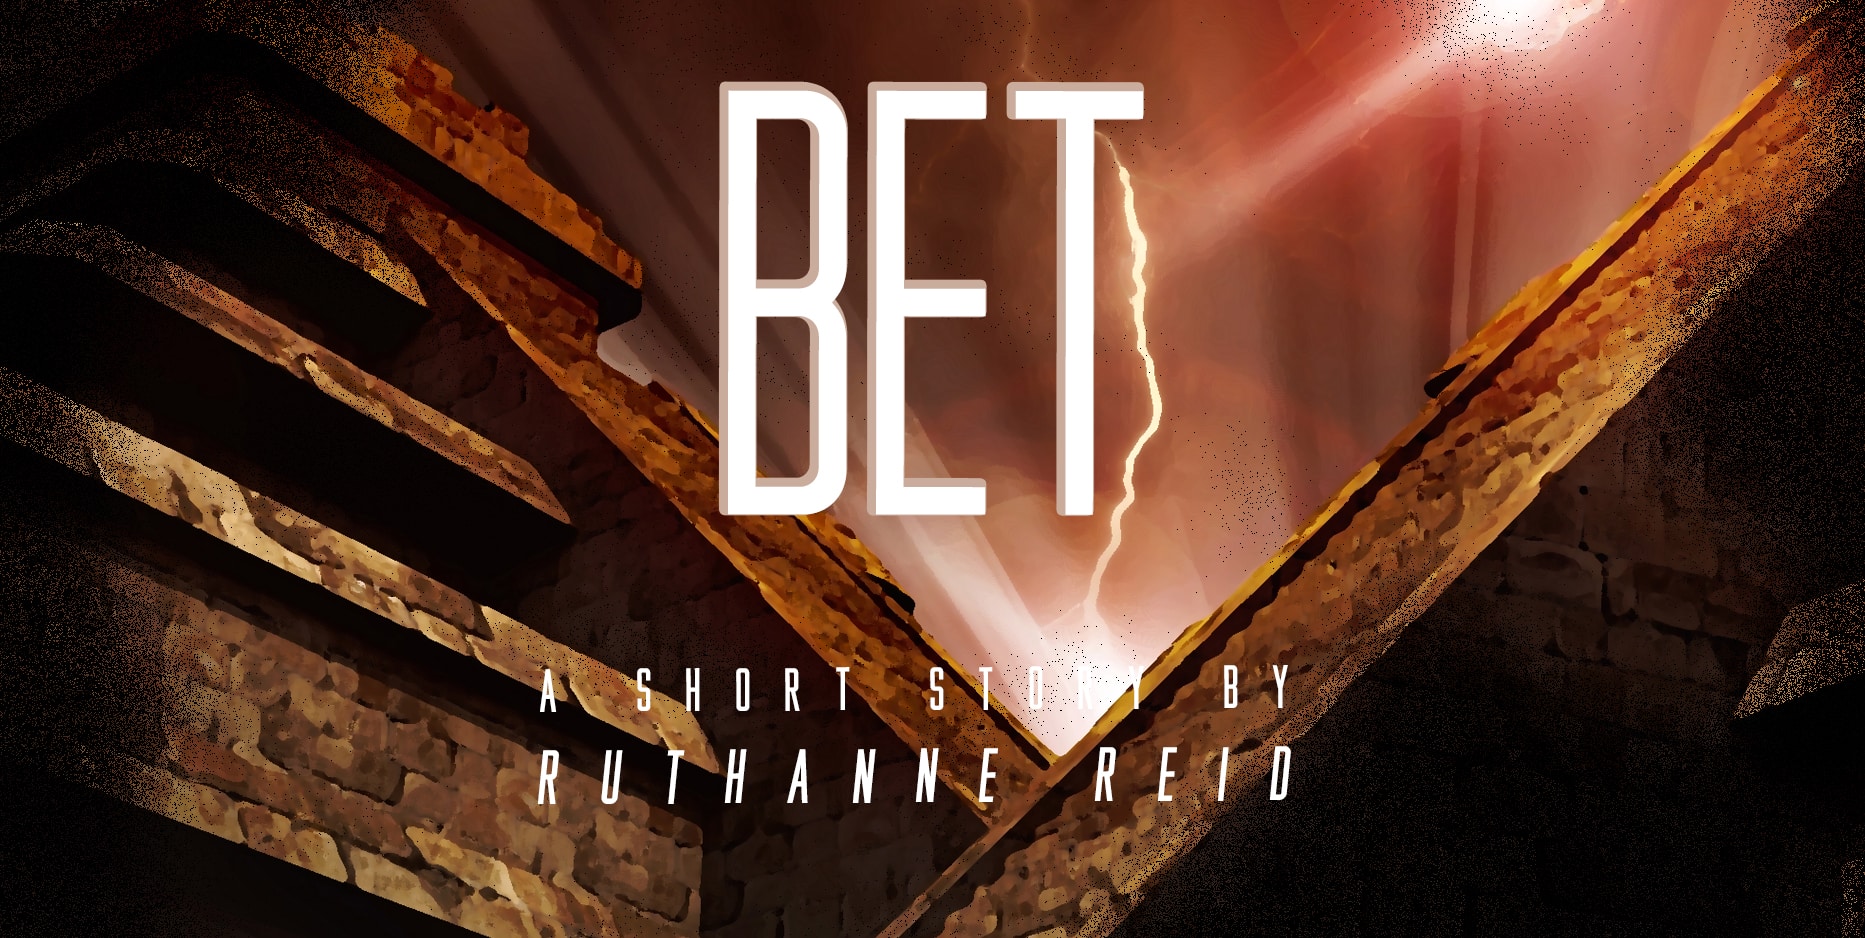 Bet: a short story by Ruthanne Reid